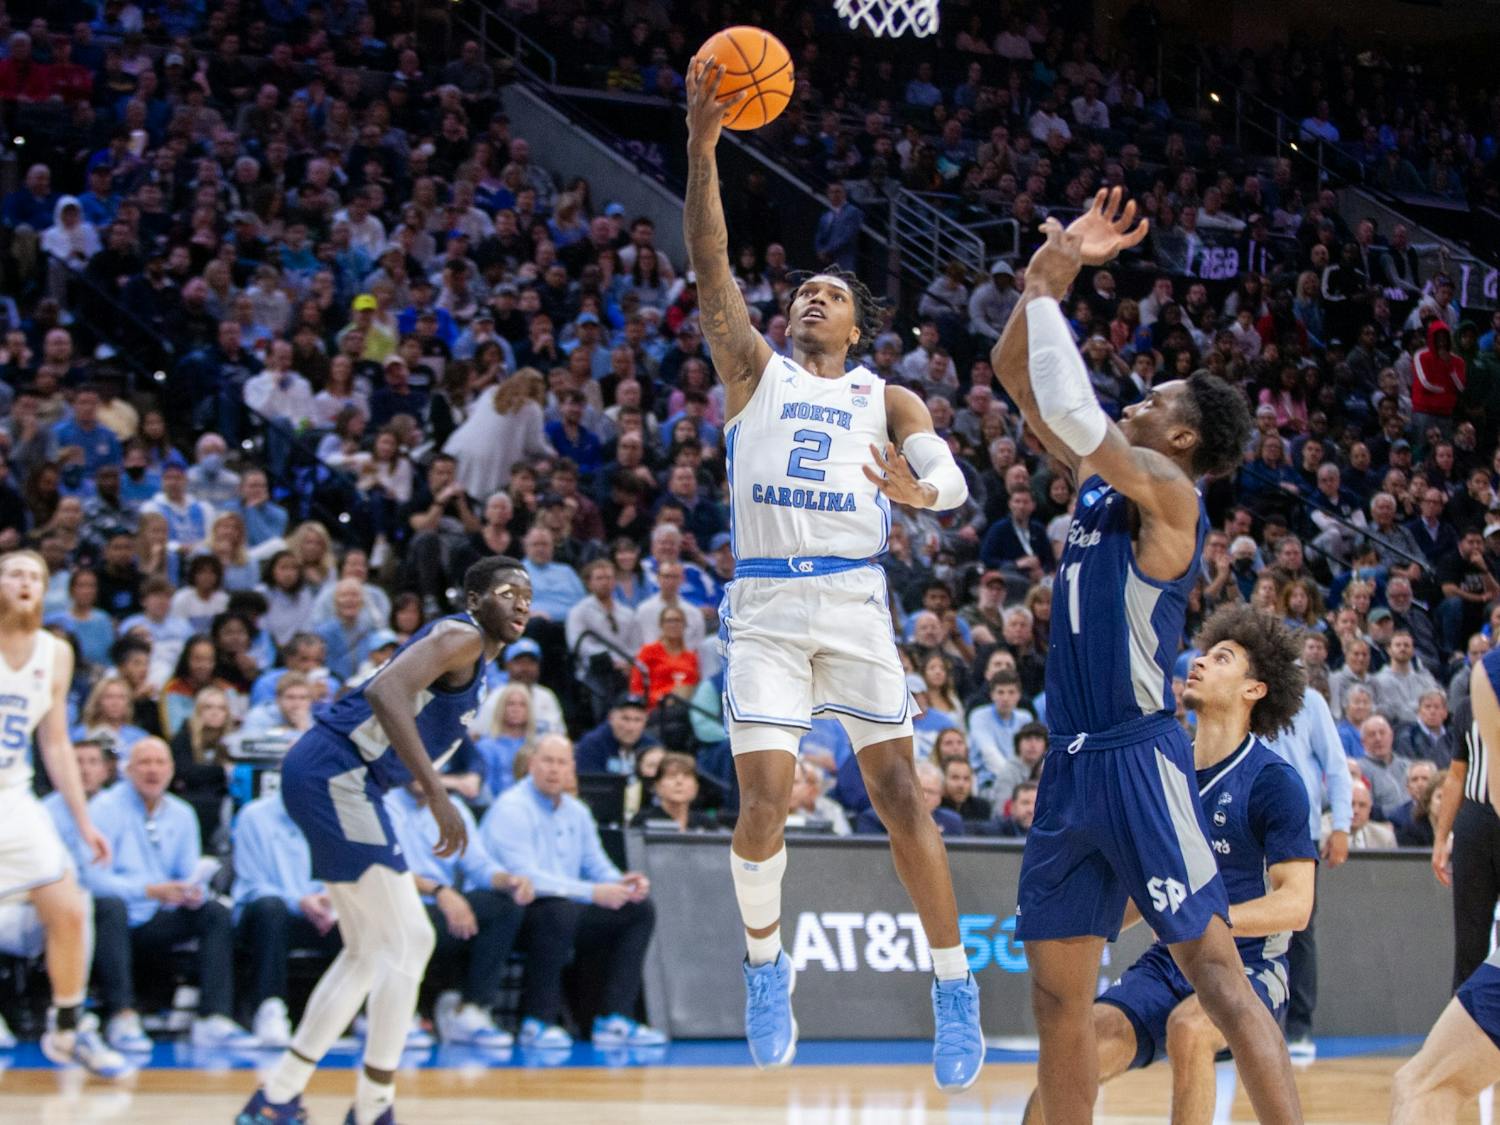 Sophomore guard Caleb Love (2) makes a layup at the Elite 8 game of the NCAA tournament against St. Peter's at the Wells Fargo Center in Philadelphia. UNC won 69-49 and is advancing to the Final Four. &nbsp;&nbsp;